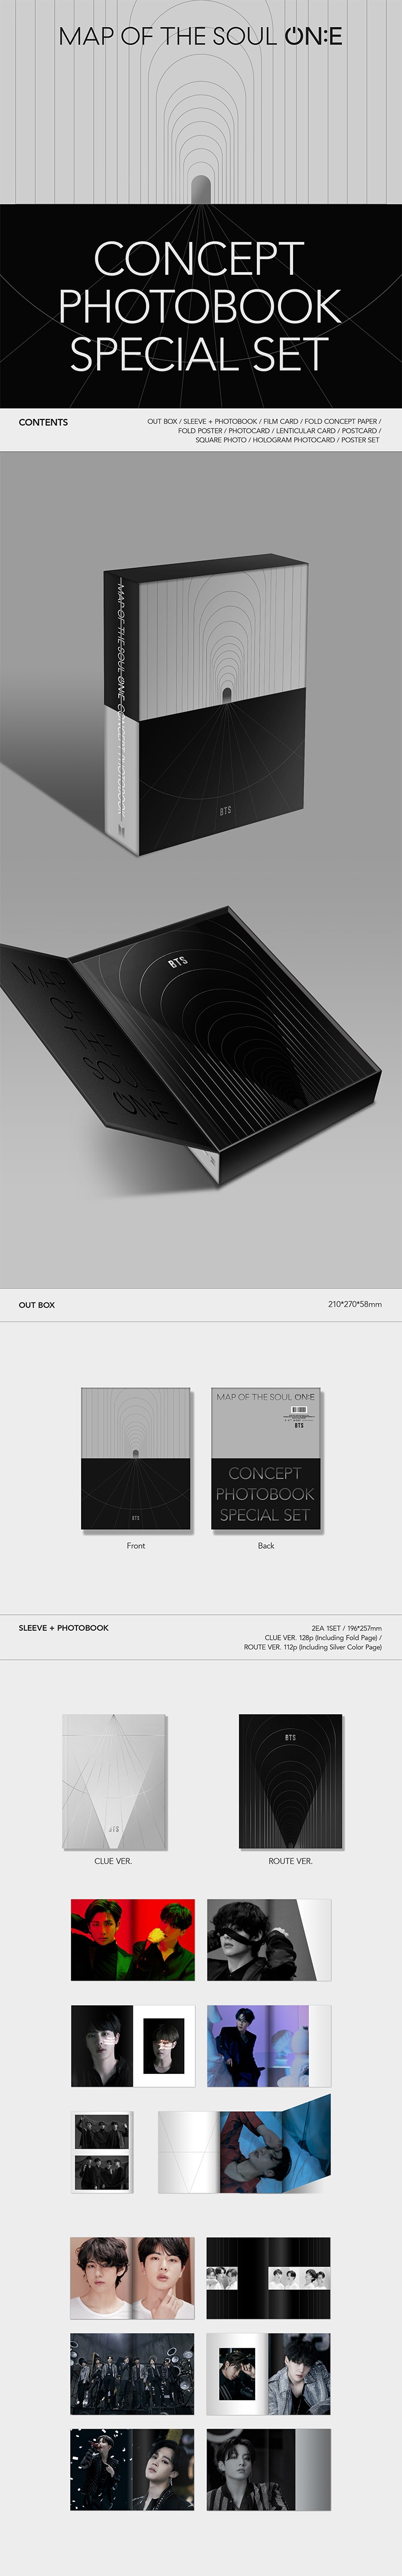 BTS - MAP OF THE SOUL ON-E CONCEPT PHOTOBOOK INFO 1